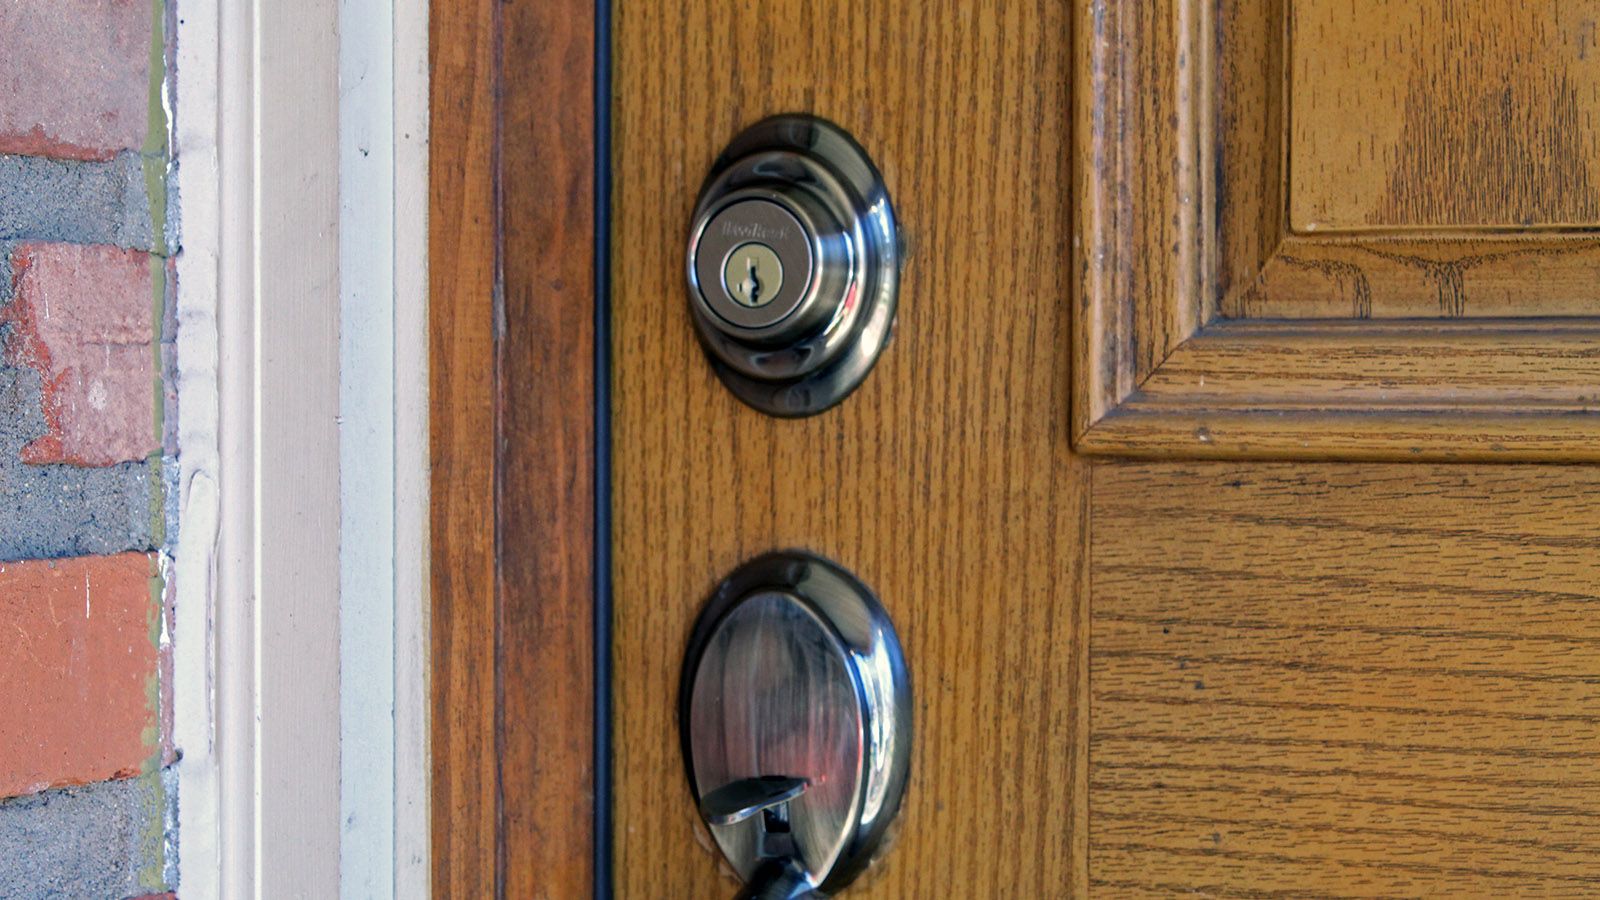 A door, with a standard looking keylock and handle.